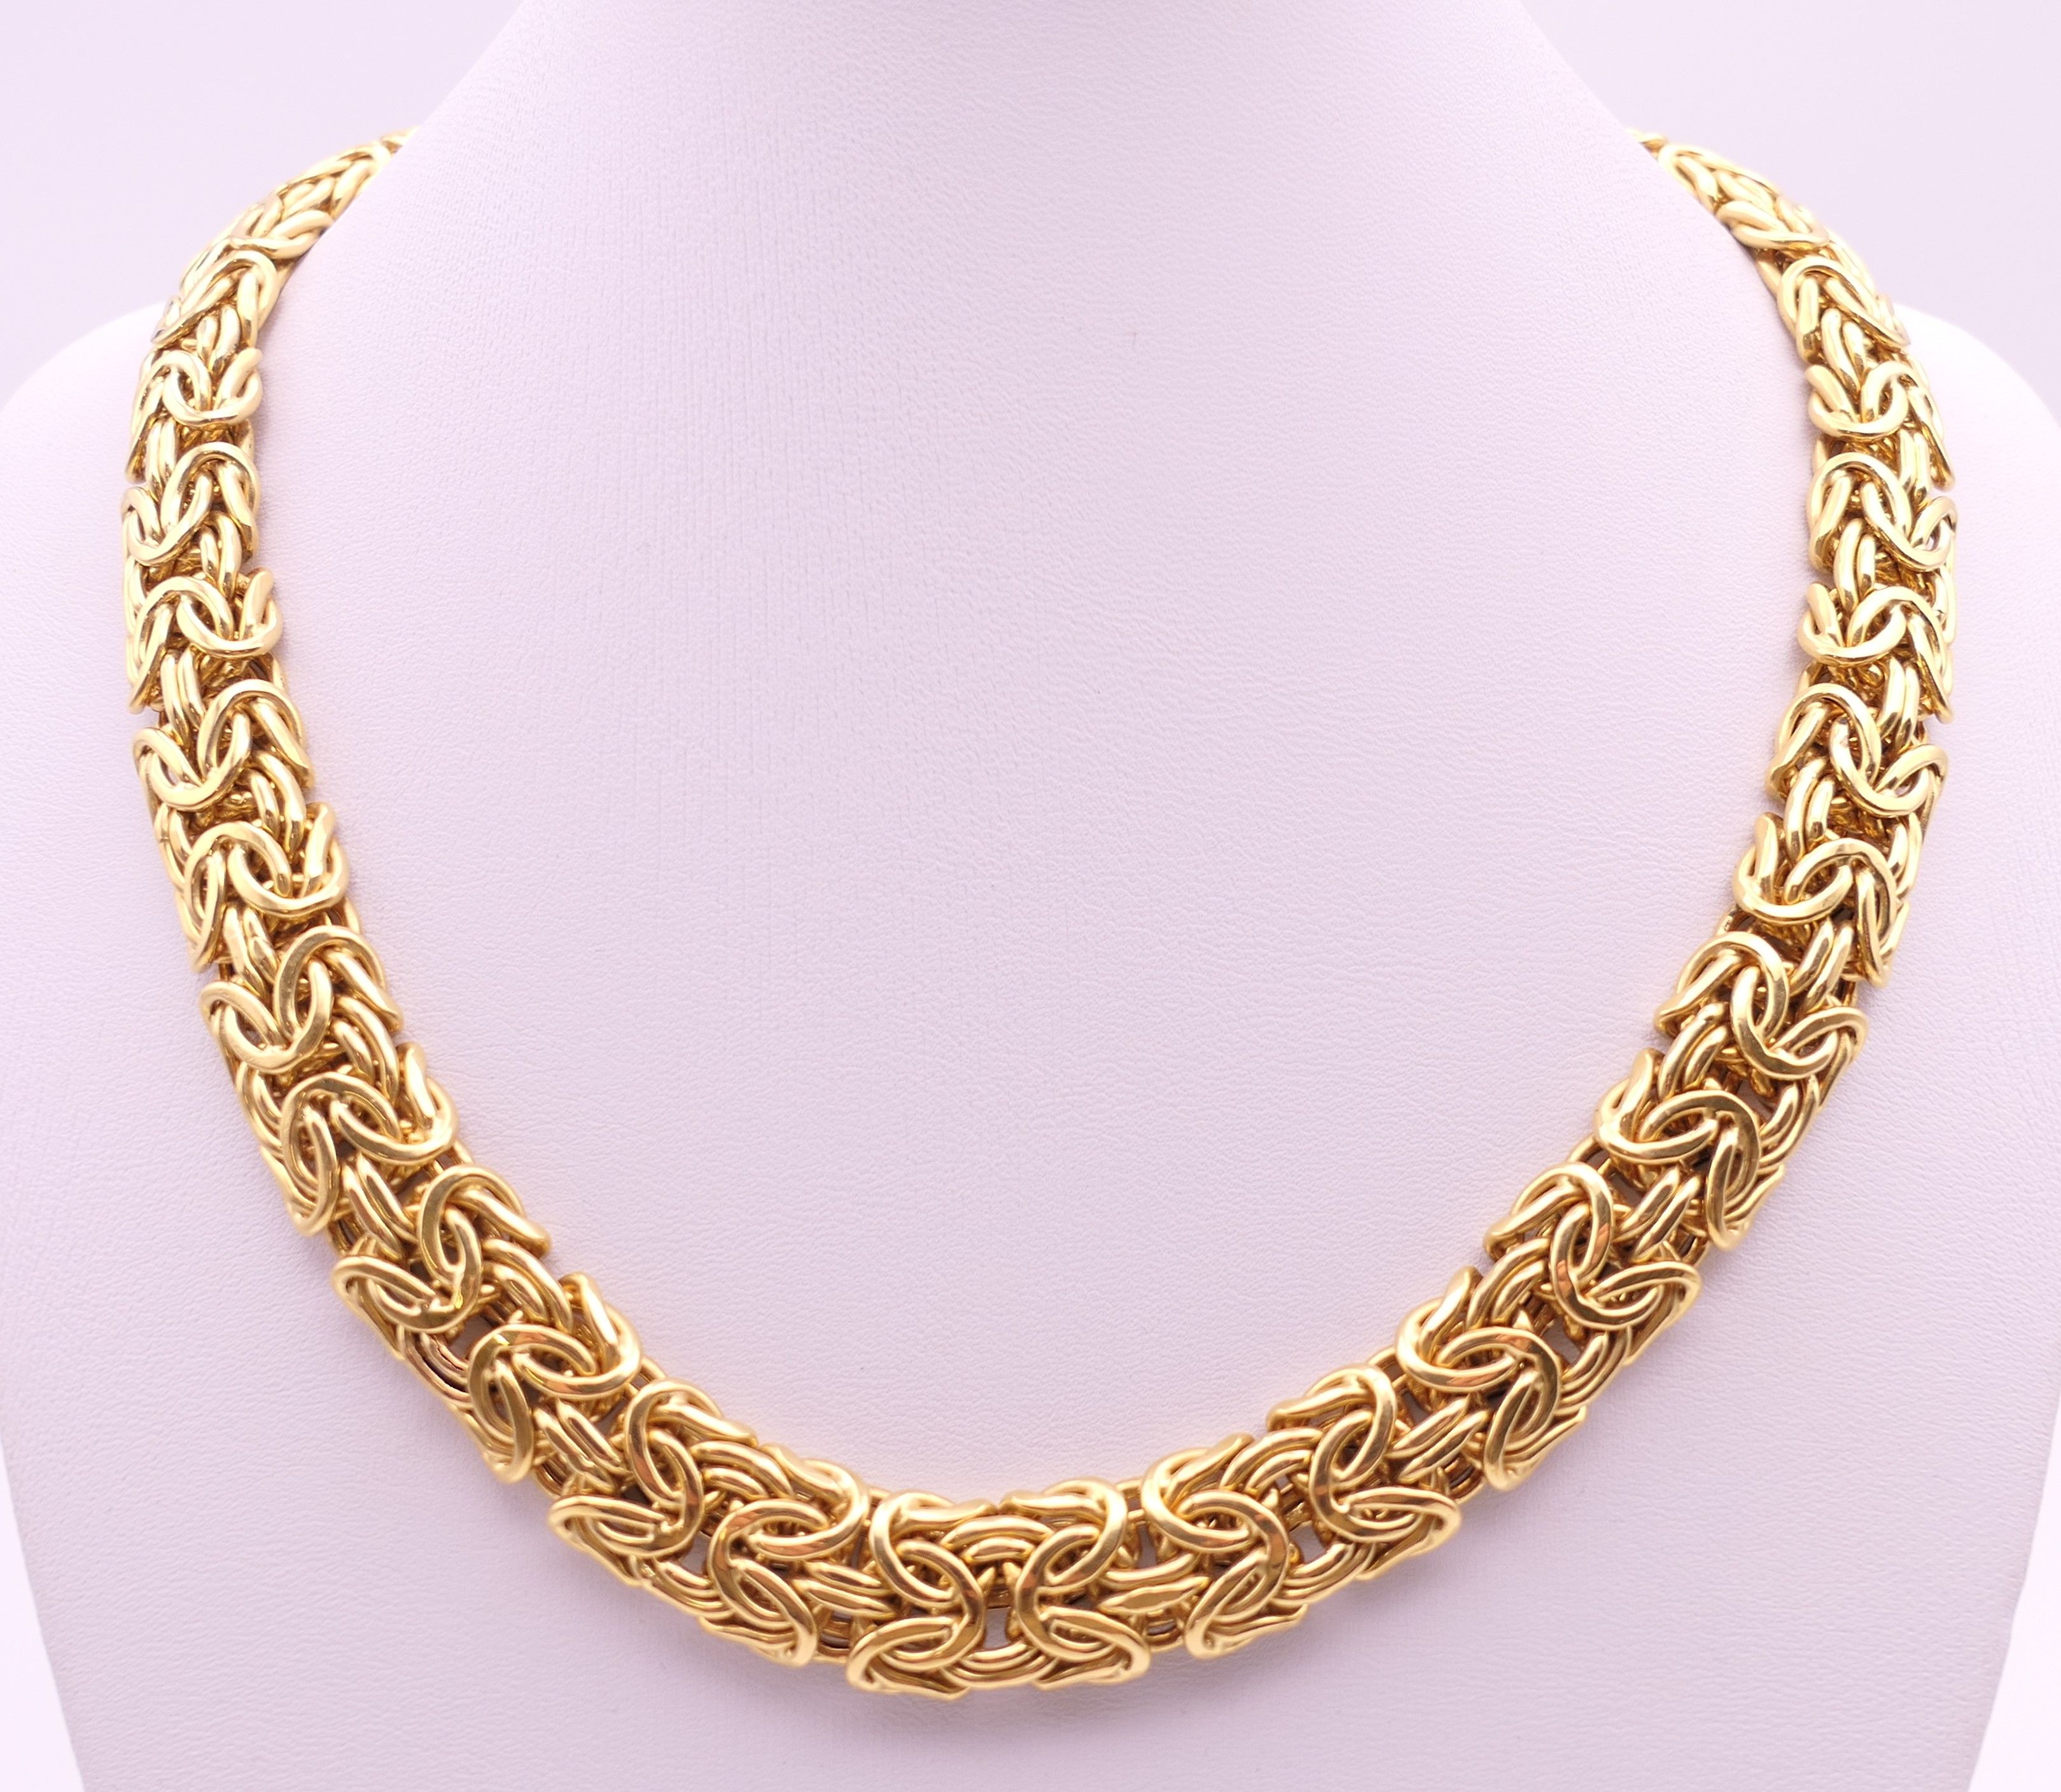 An 18 ct gold twist form necklace. 45.5 cm long. 80.5 grammes. - Image 5 of 5